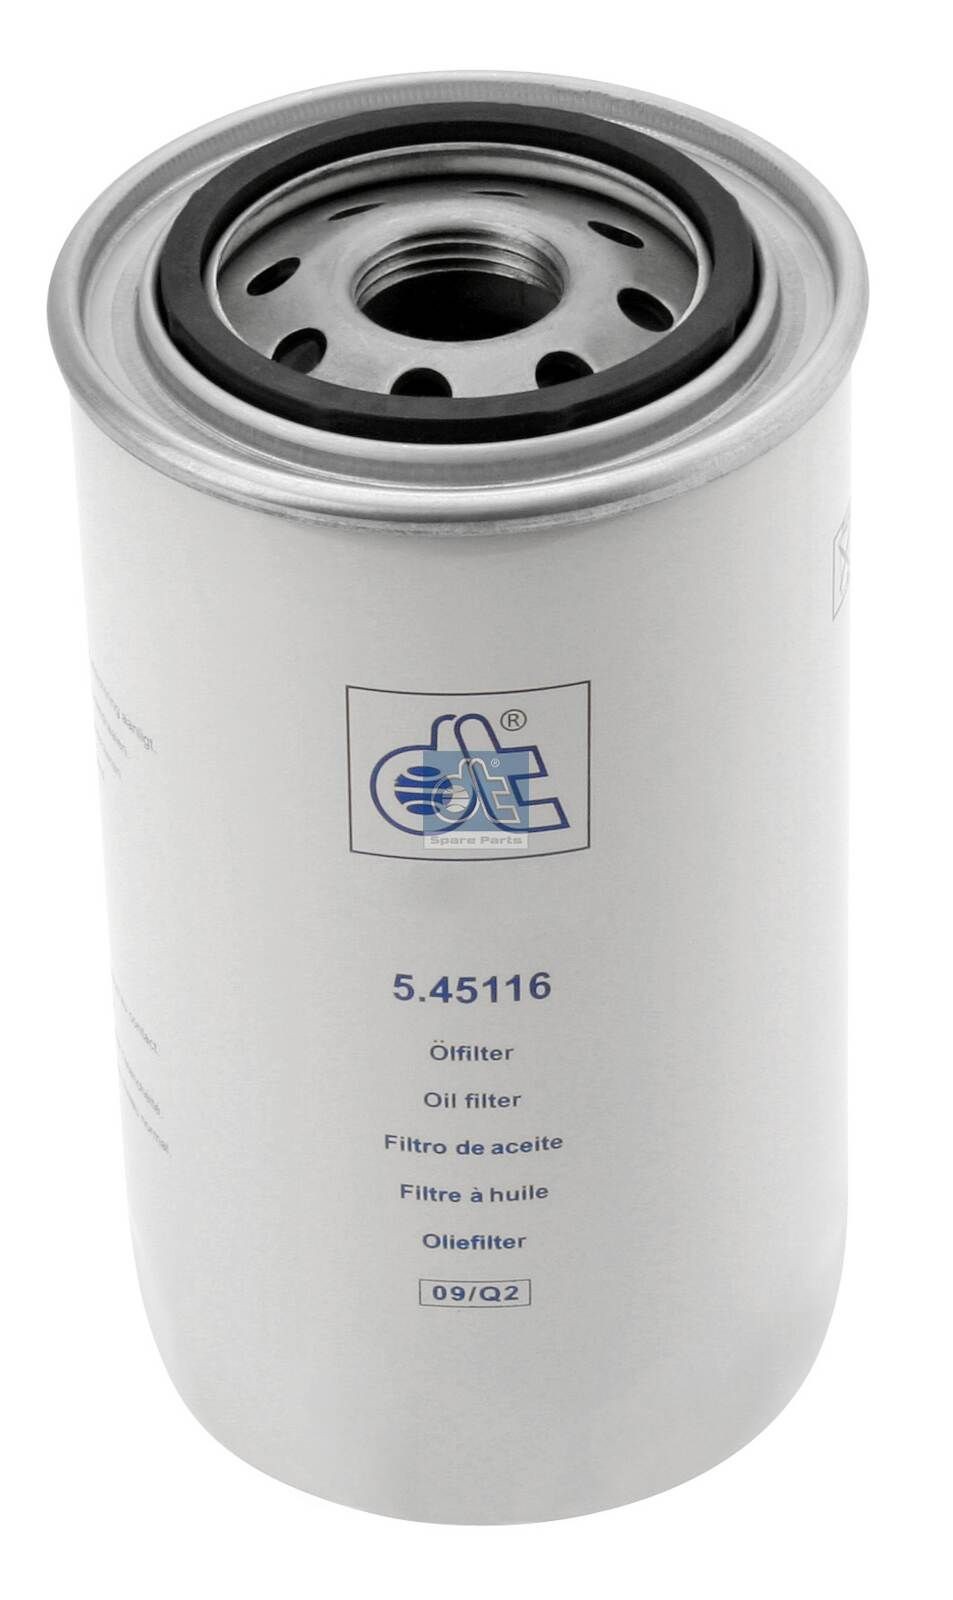 H19W10 DT Spare Parts 5.45116 Oil filter 5040 33399